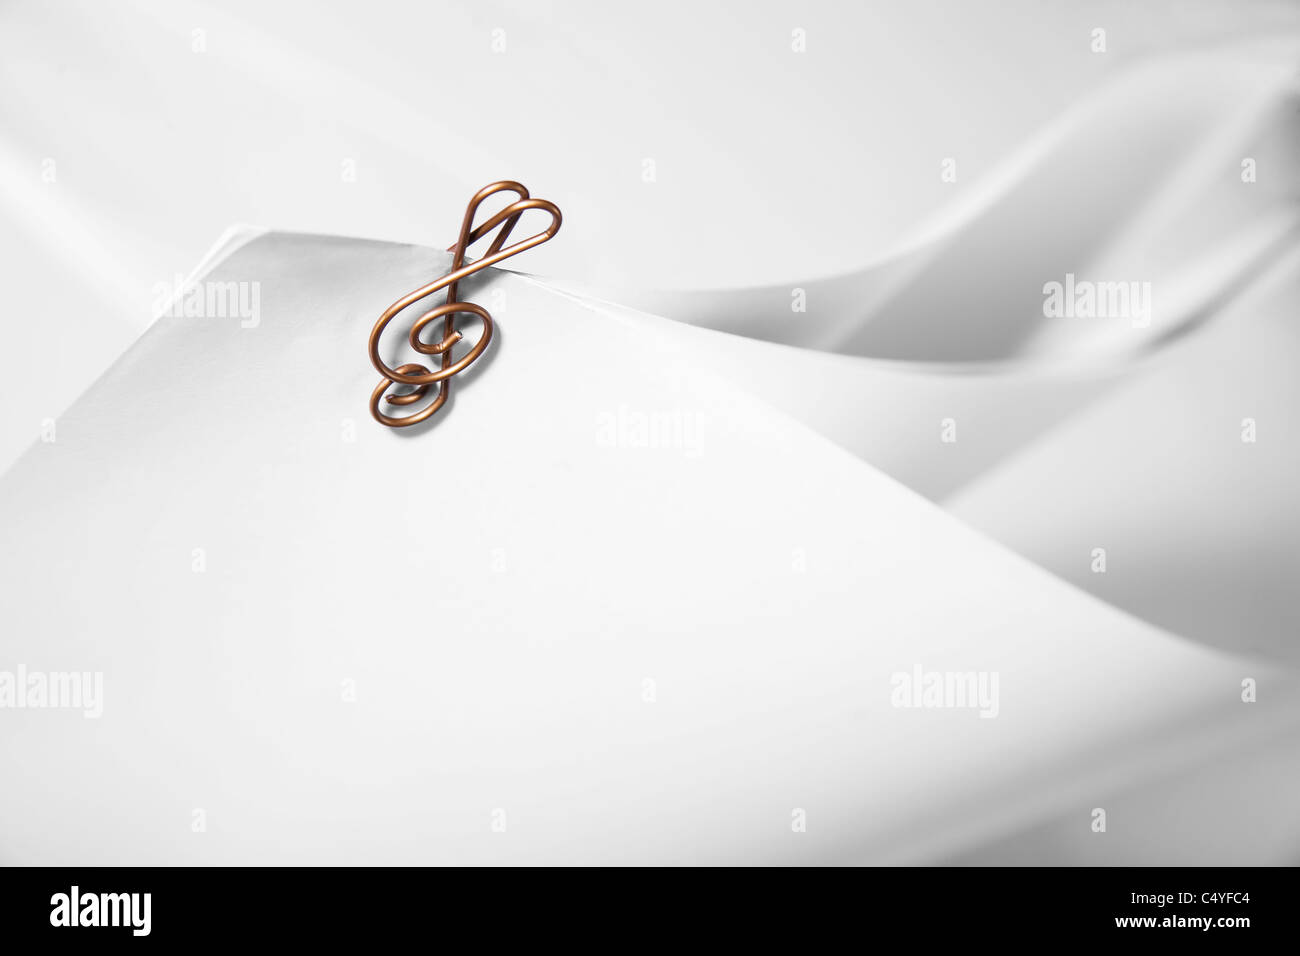 Paper clip shaped like a music clef clipped to white paper. Stock Photo